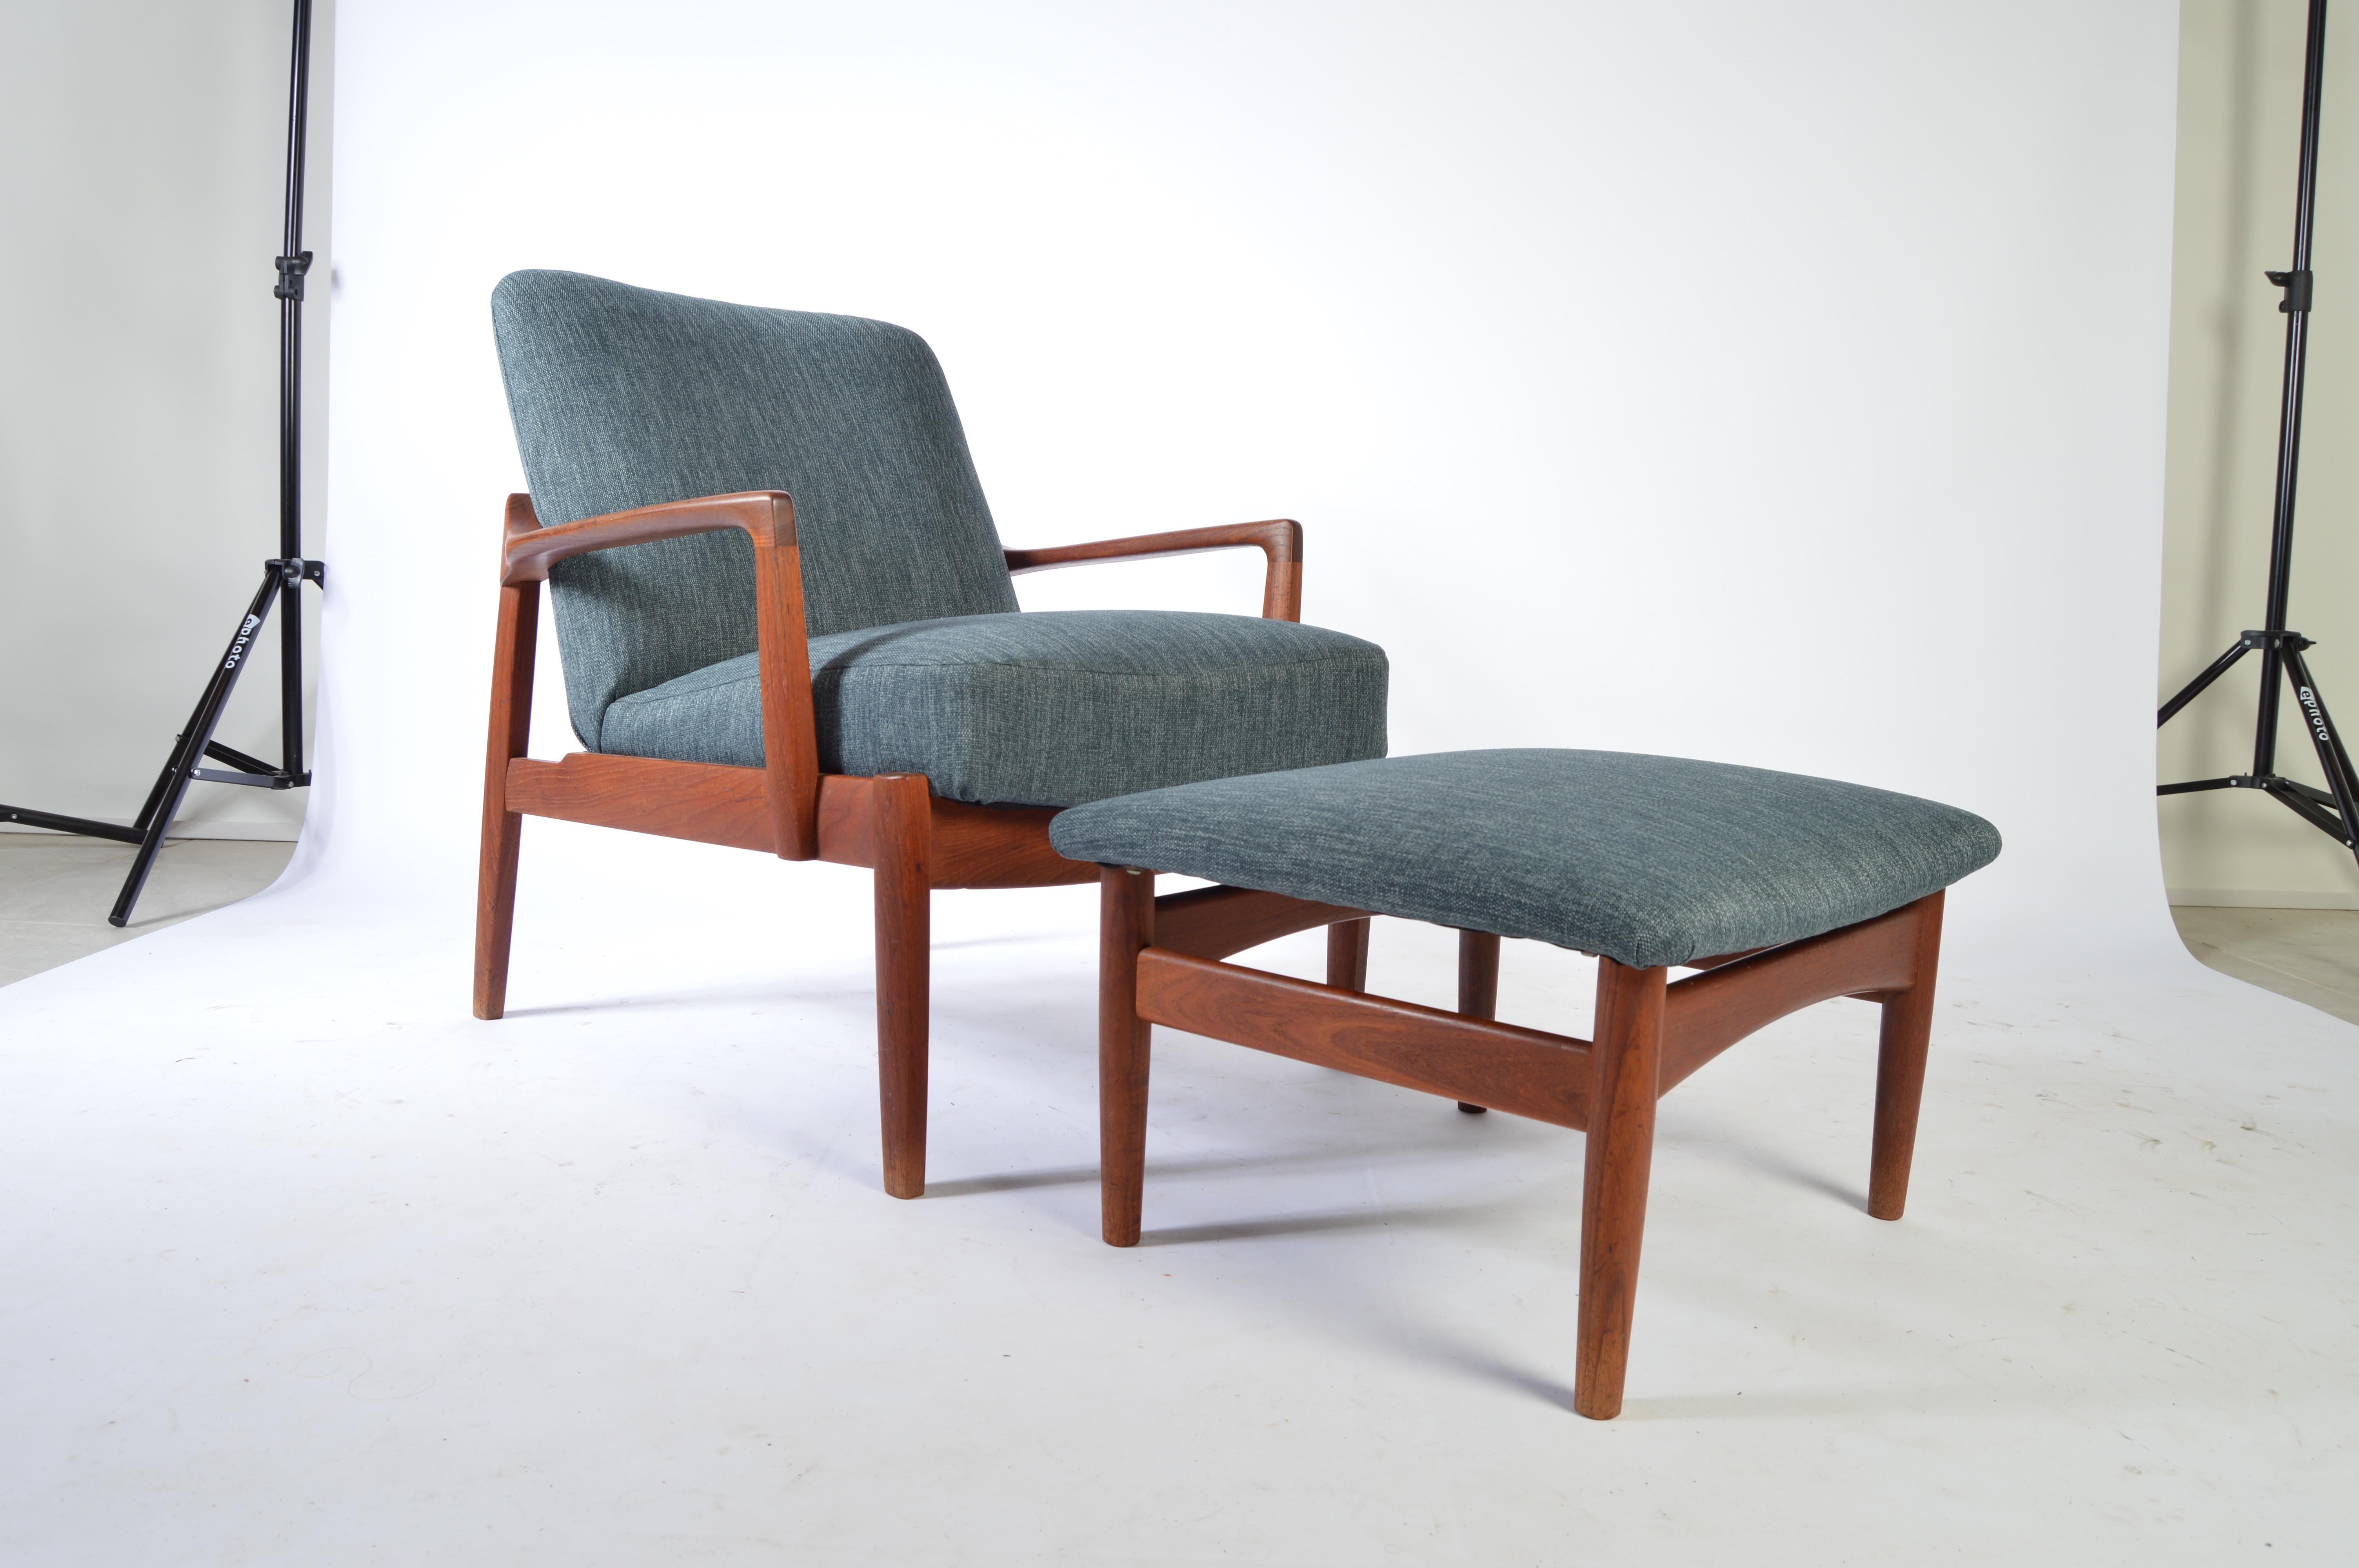 Beautifully designed Danish Easy chair and ottoman by Tove and Edvard Kindt-Larsen for France & Son Denmark. Beautifully executed in teak having the original upholstery. Upholstery shows signs of usage, reupholstery is recommended. Soft and